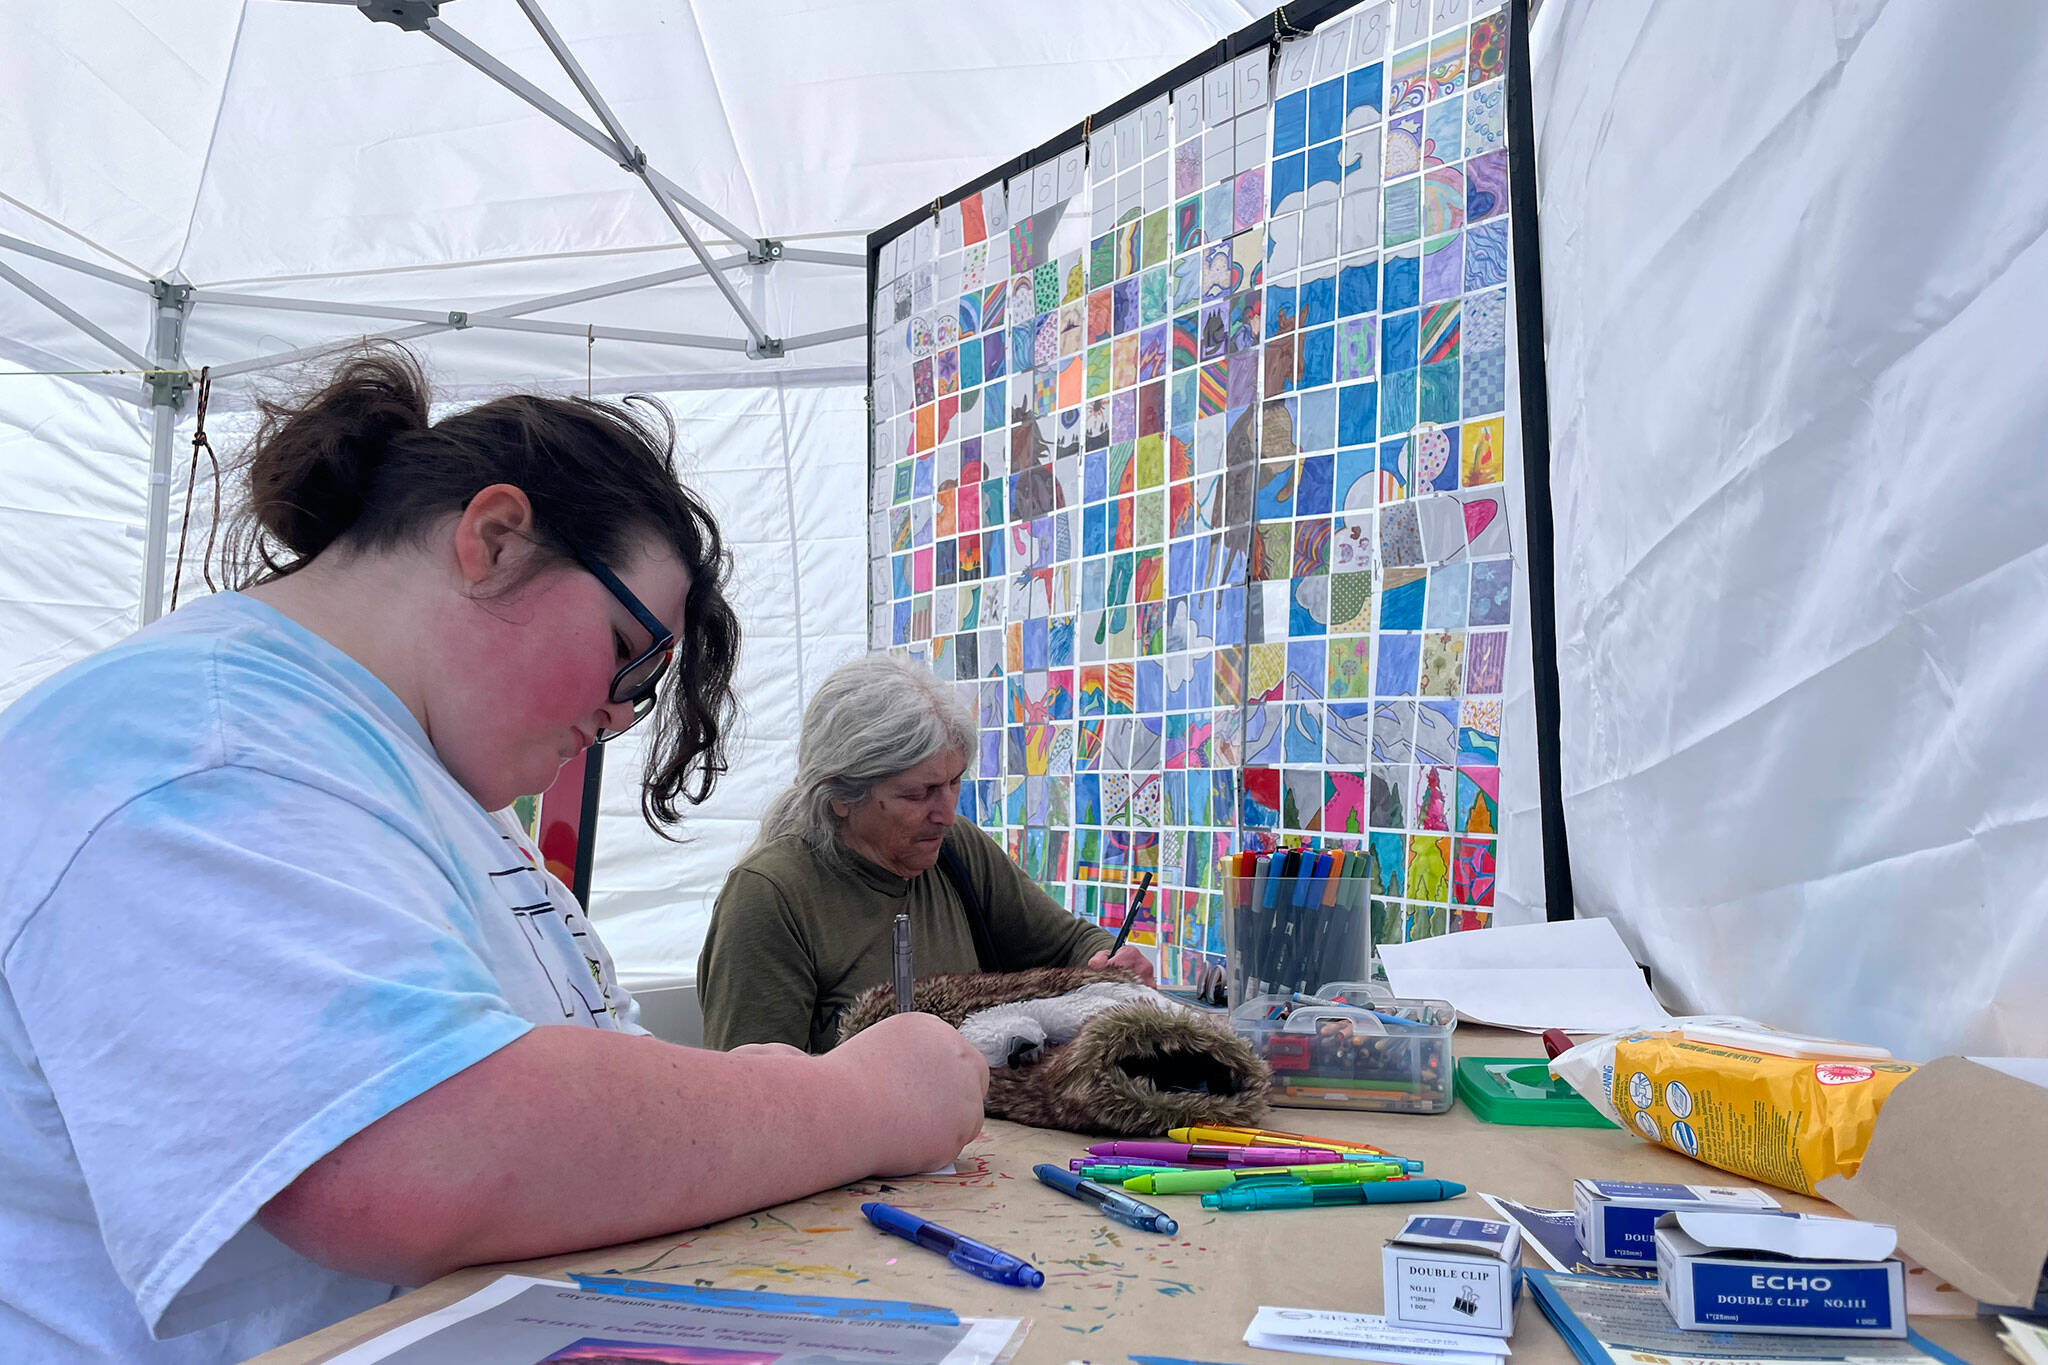 Sequim Gazette photo by Matthew Nash
Abby Blaine, of Port Angeles, left, and Lauren Churchill of Sequim, design their own cards at the Irrigation Festival’s booth at the Innovative Arts and Crafts Fair. Each card helps recreate a portion of this year’s poster designed by Laura Friedkin. The idea was developed by festival volunteer Jean Wyatt, and the cards will likely go up in the Sequim Civic Center in June, organizers said.